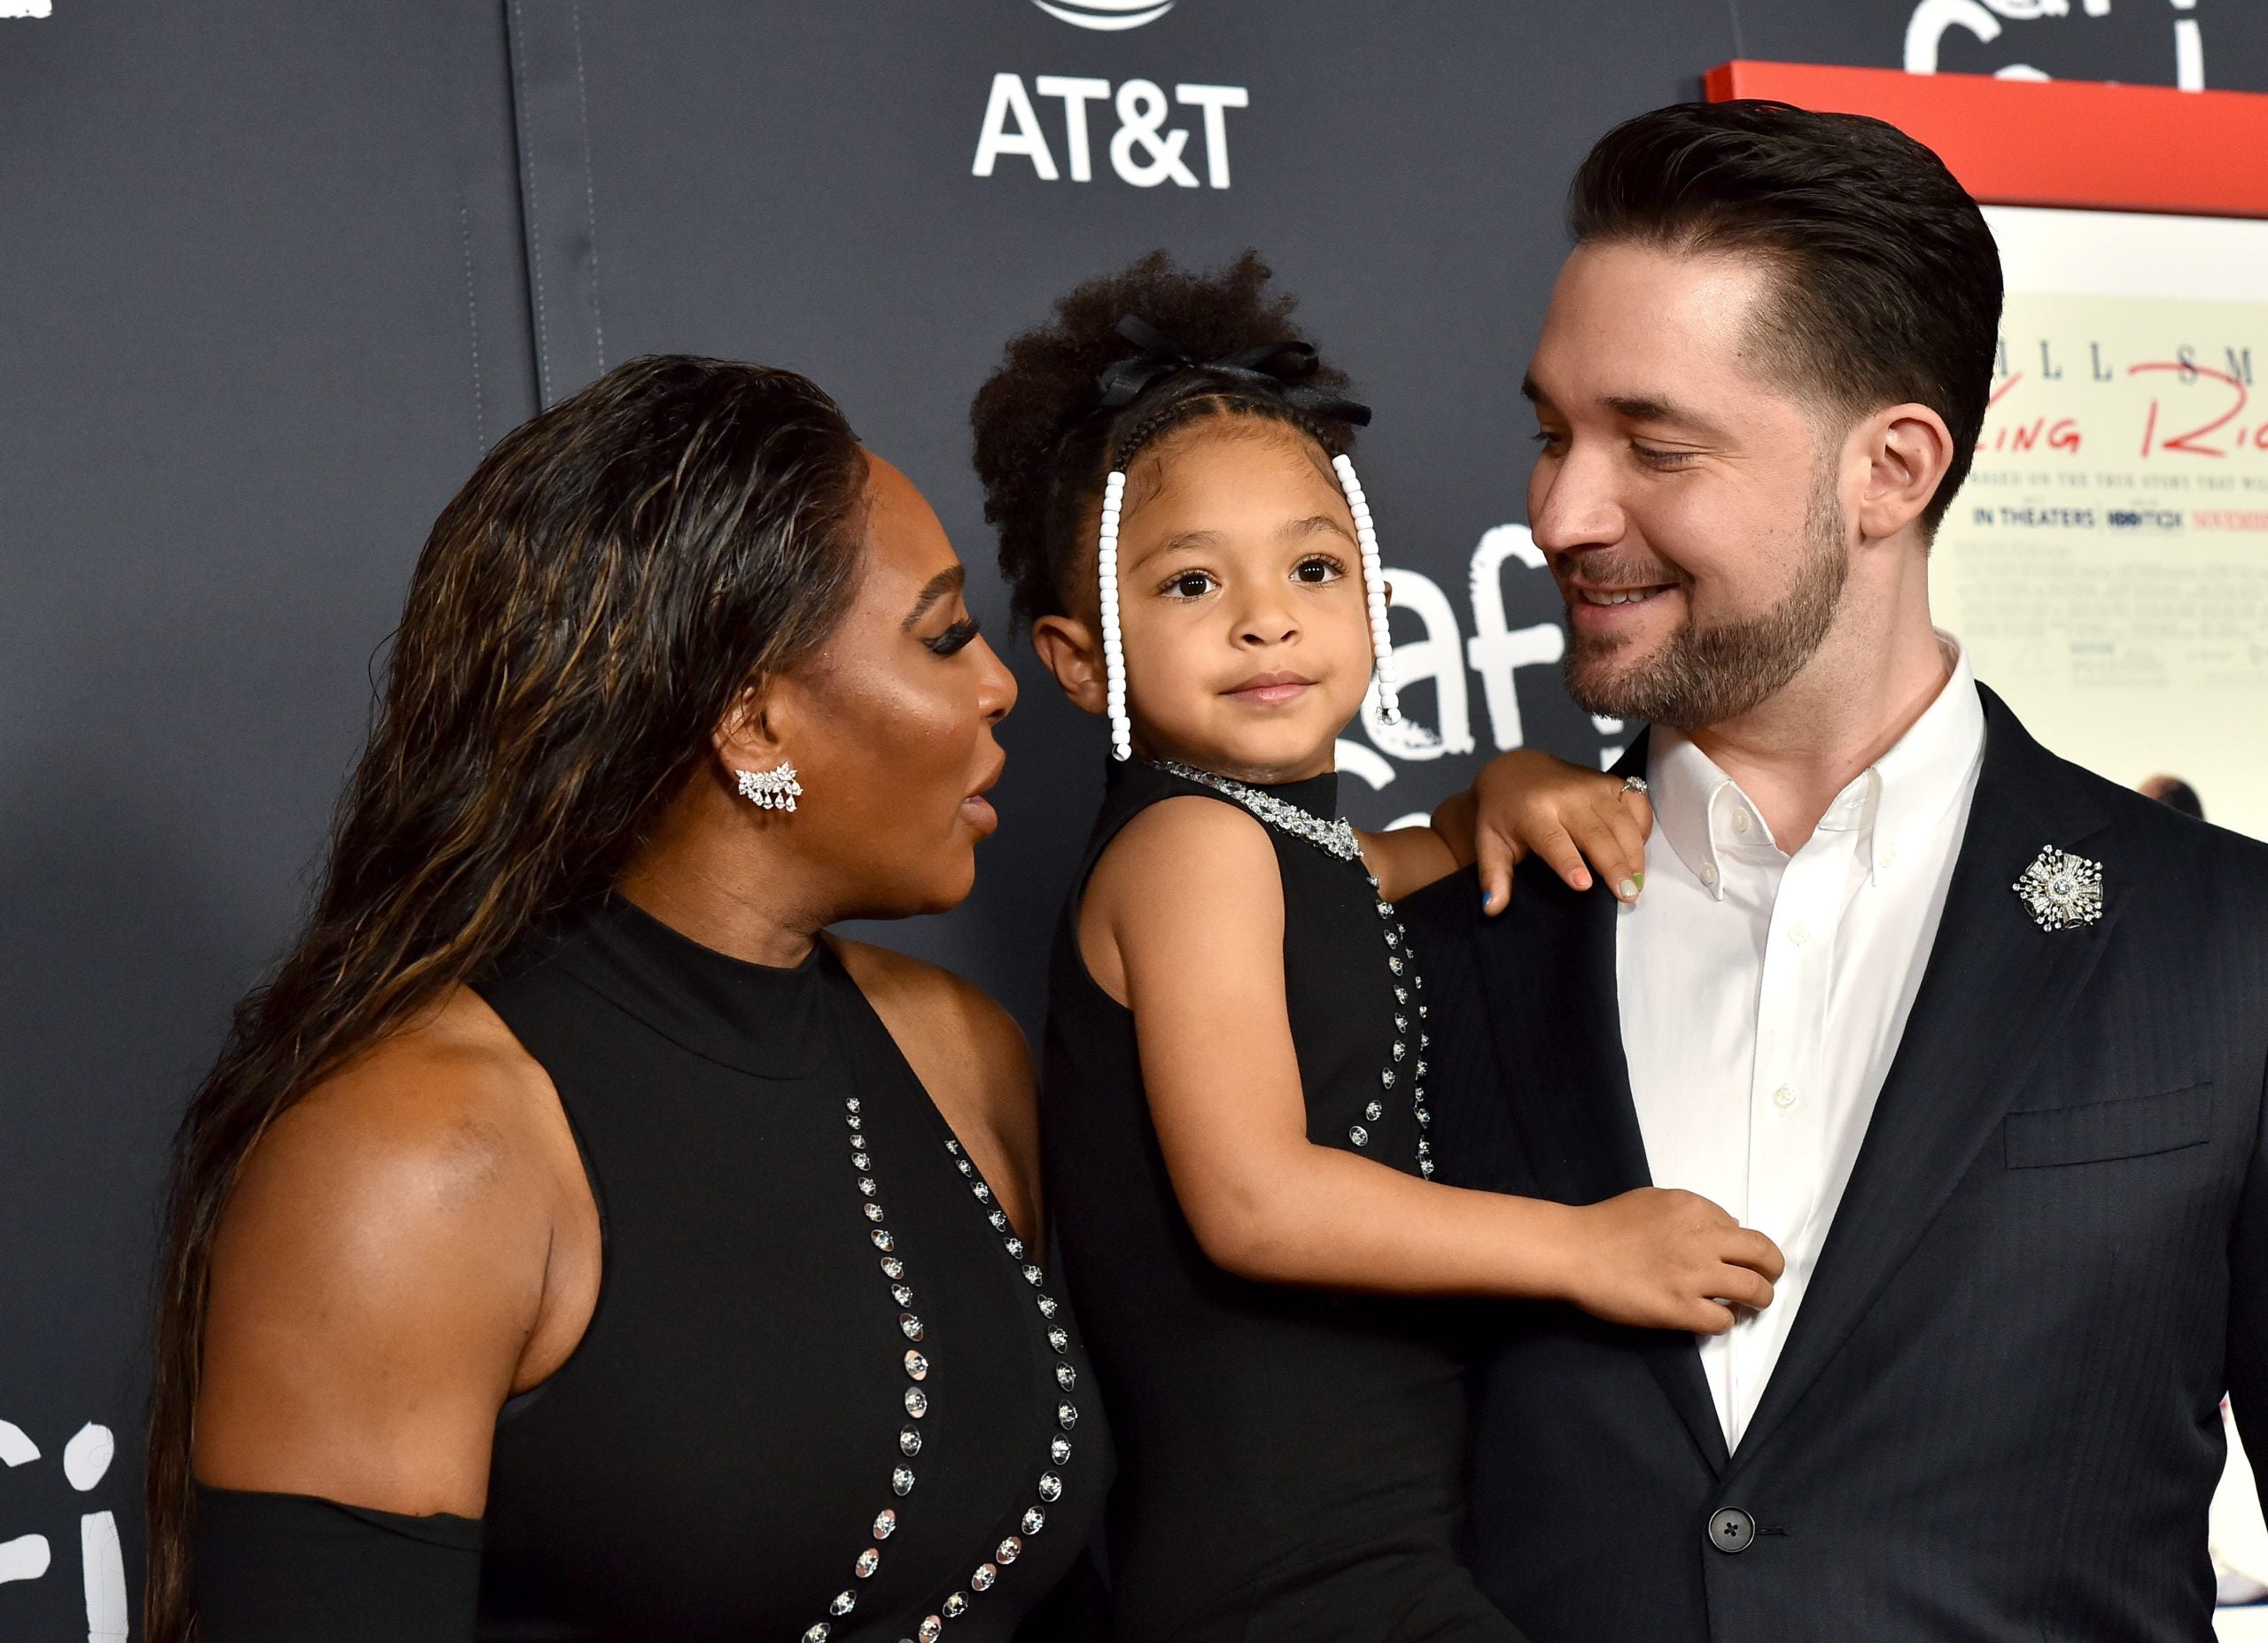 Move Over Mama! Serena Williams’ 4-Year-Old Daughter Is Already A Force To Be Reckoned With On The Tennis Court